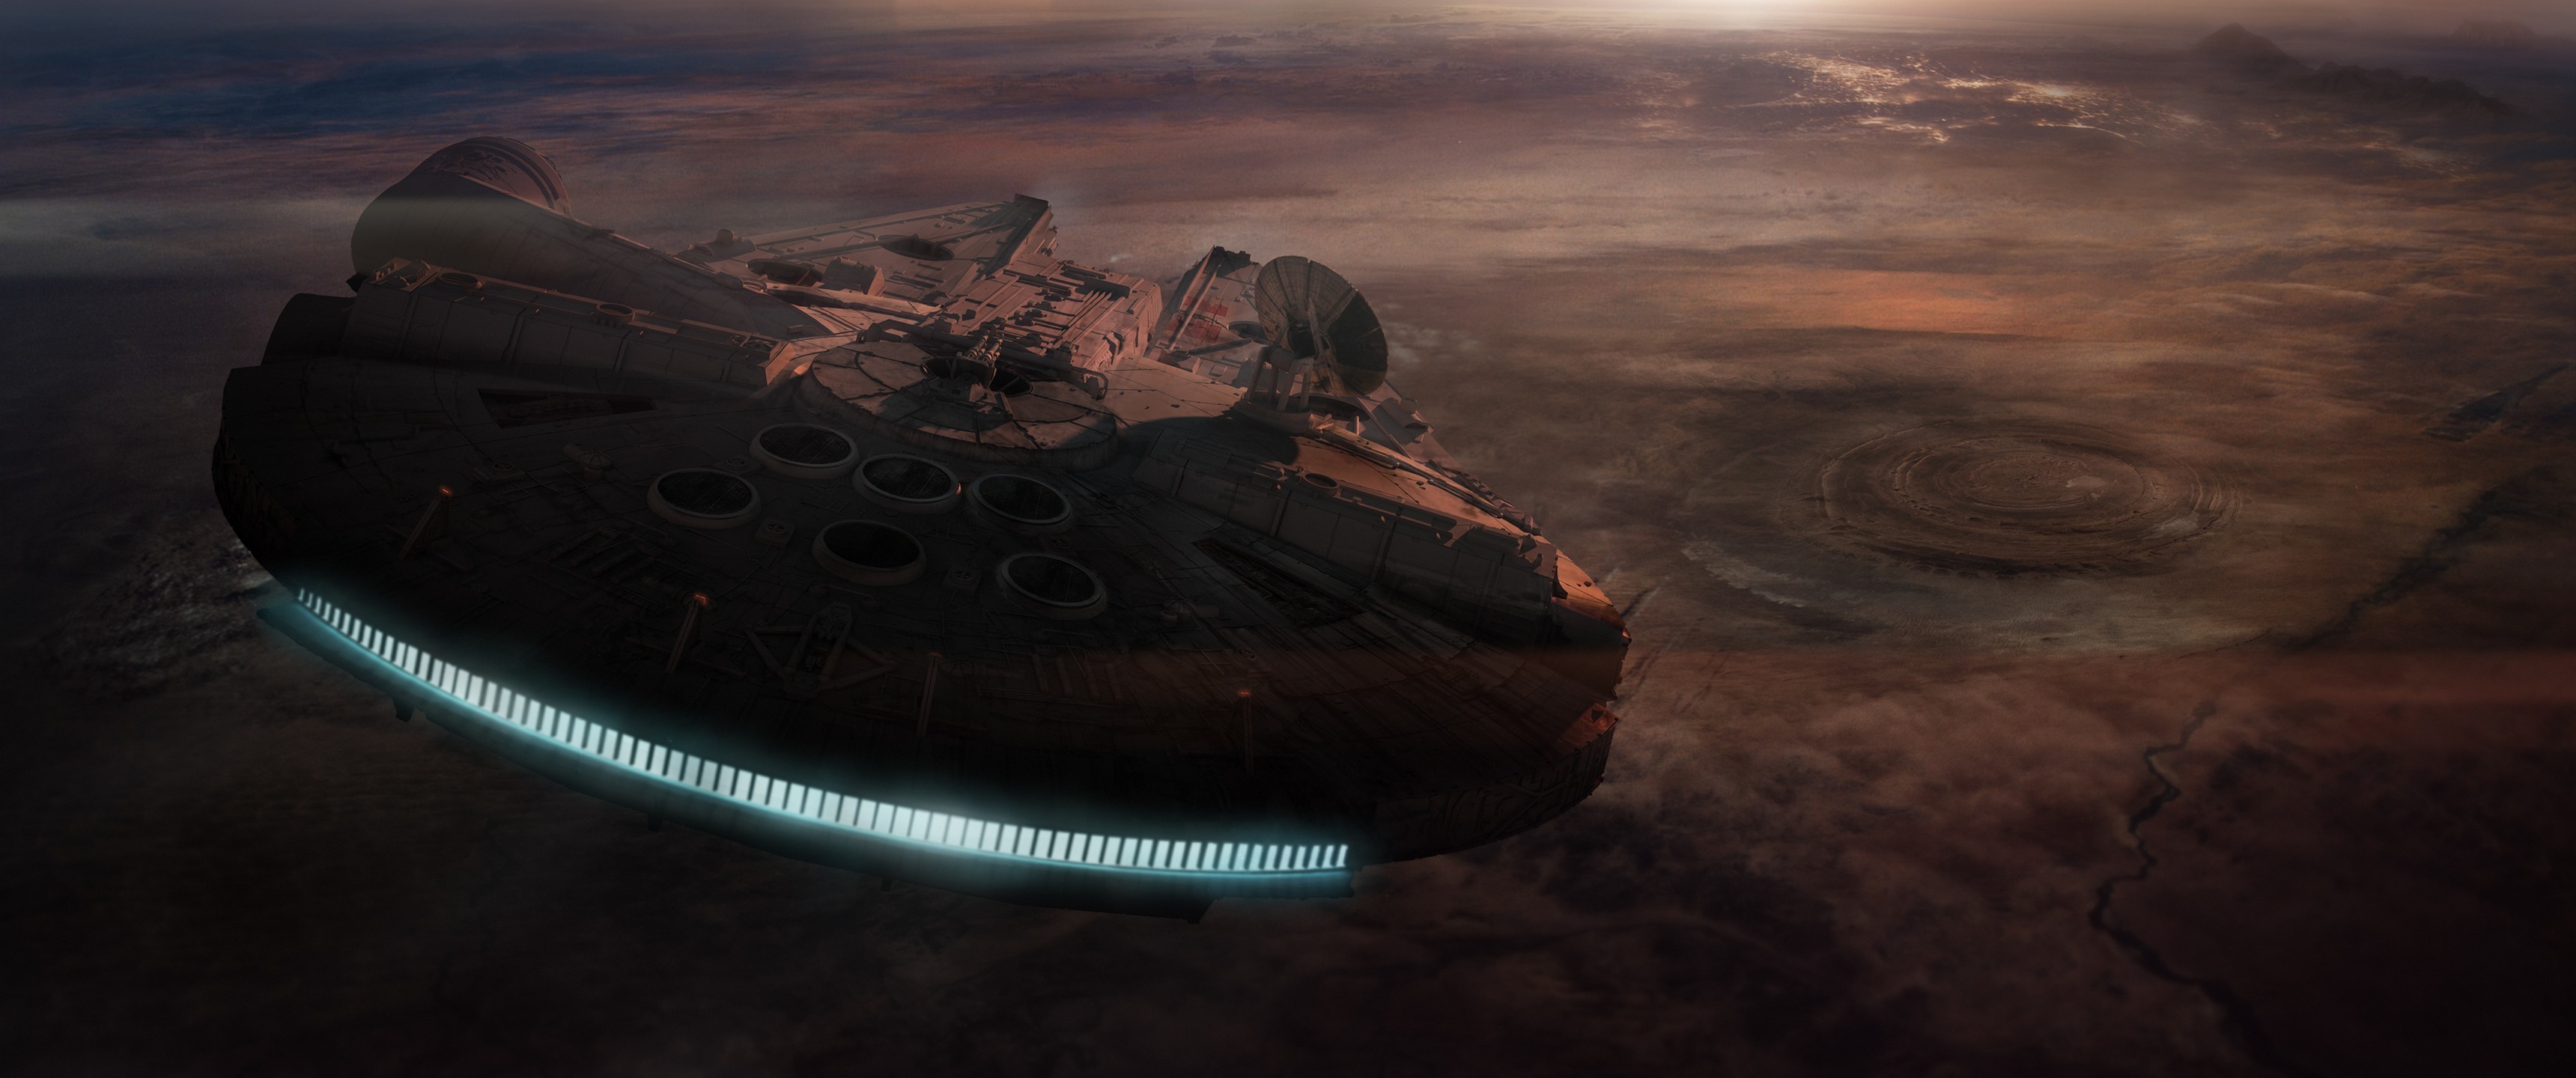 Star Wars, Millennium Falcon Wallpapers HD / Desktop and Mobile .